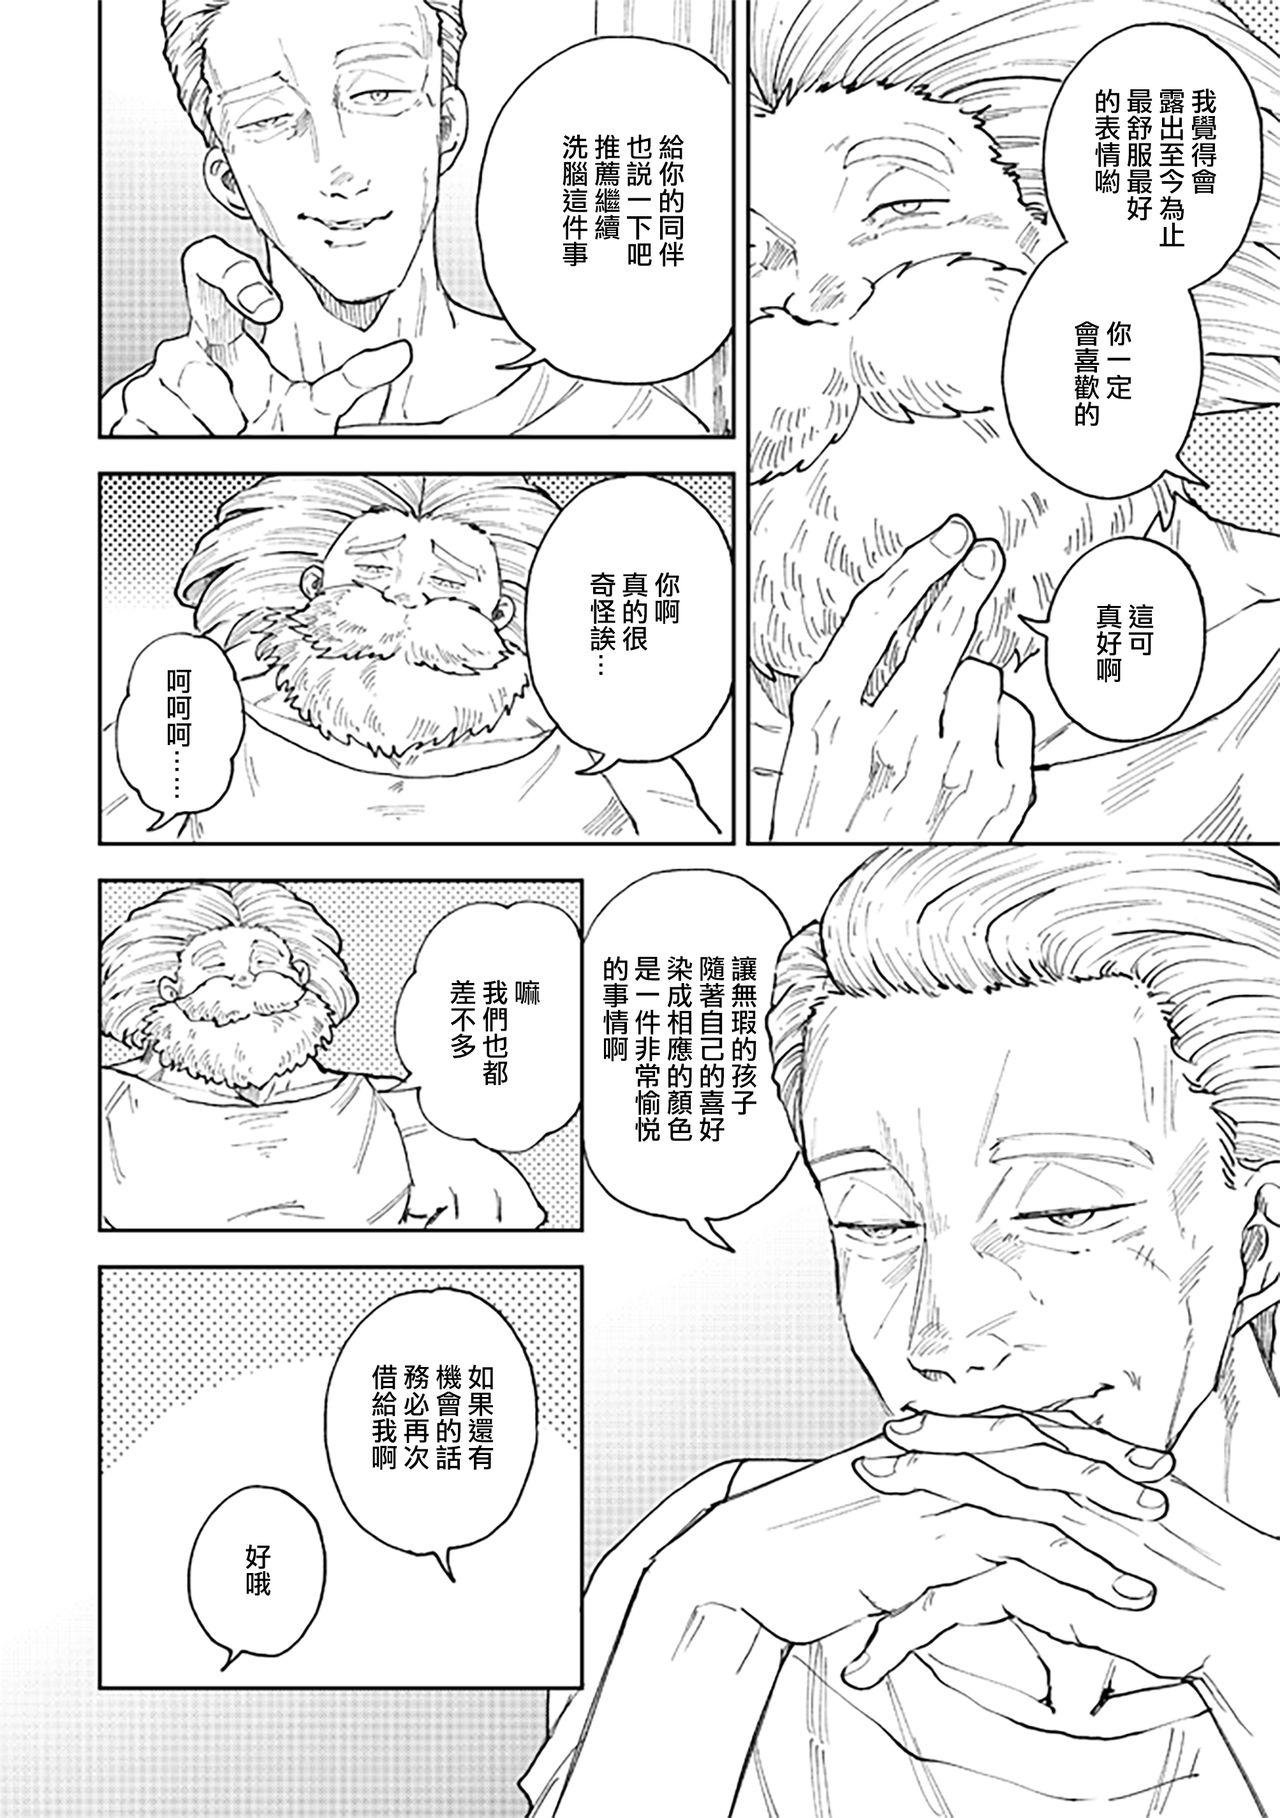 Lolicon Rental Kamyu-kun 7 day - Dragon quest xi Ginger - Page 9